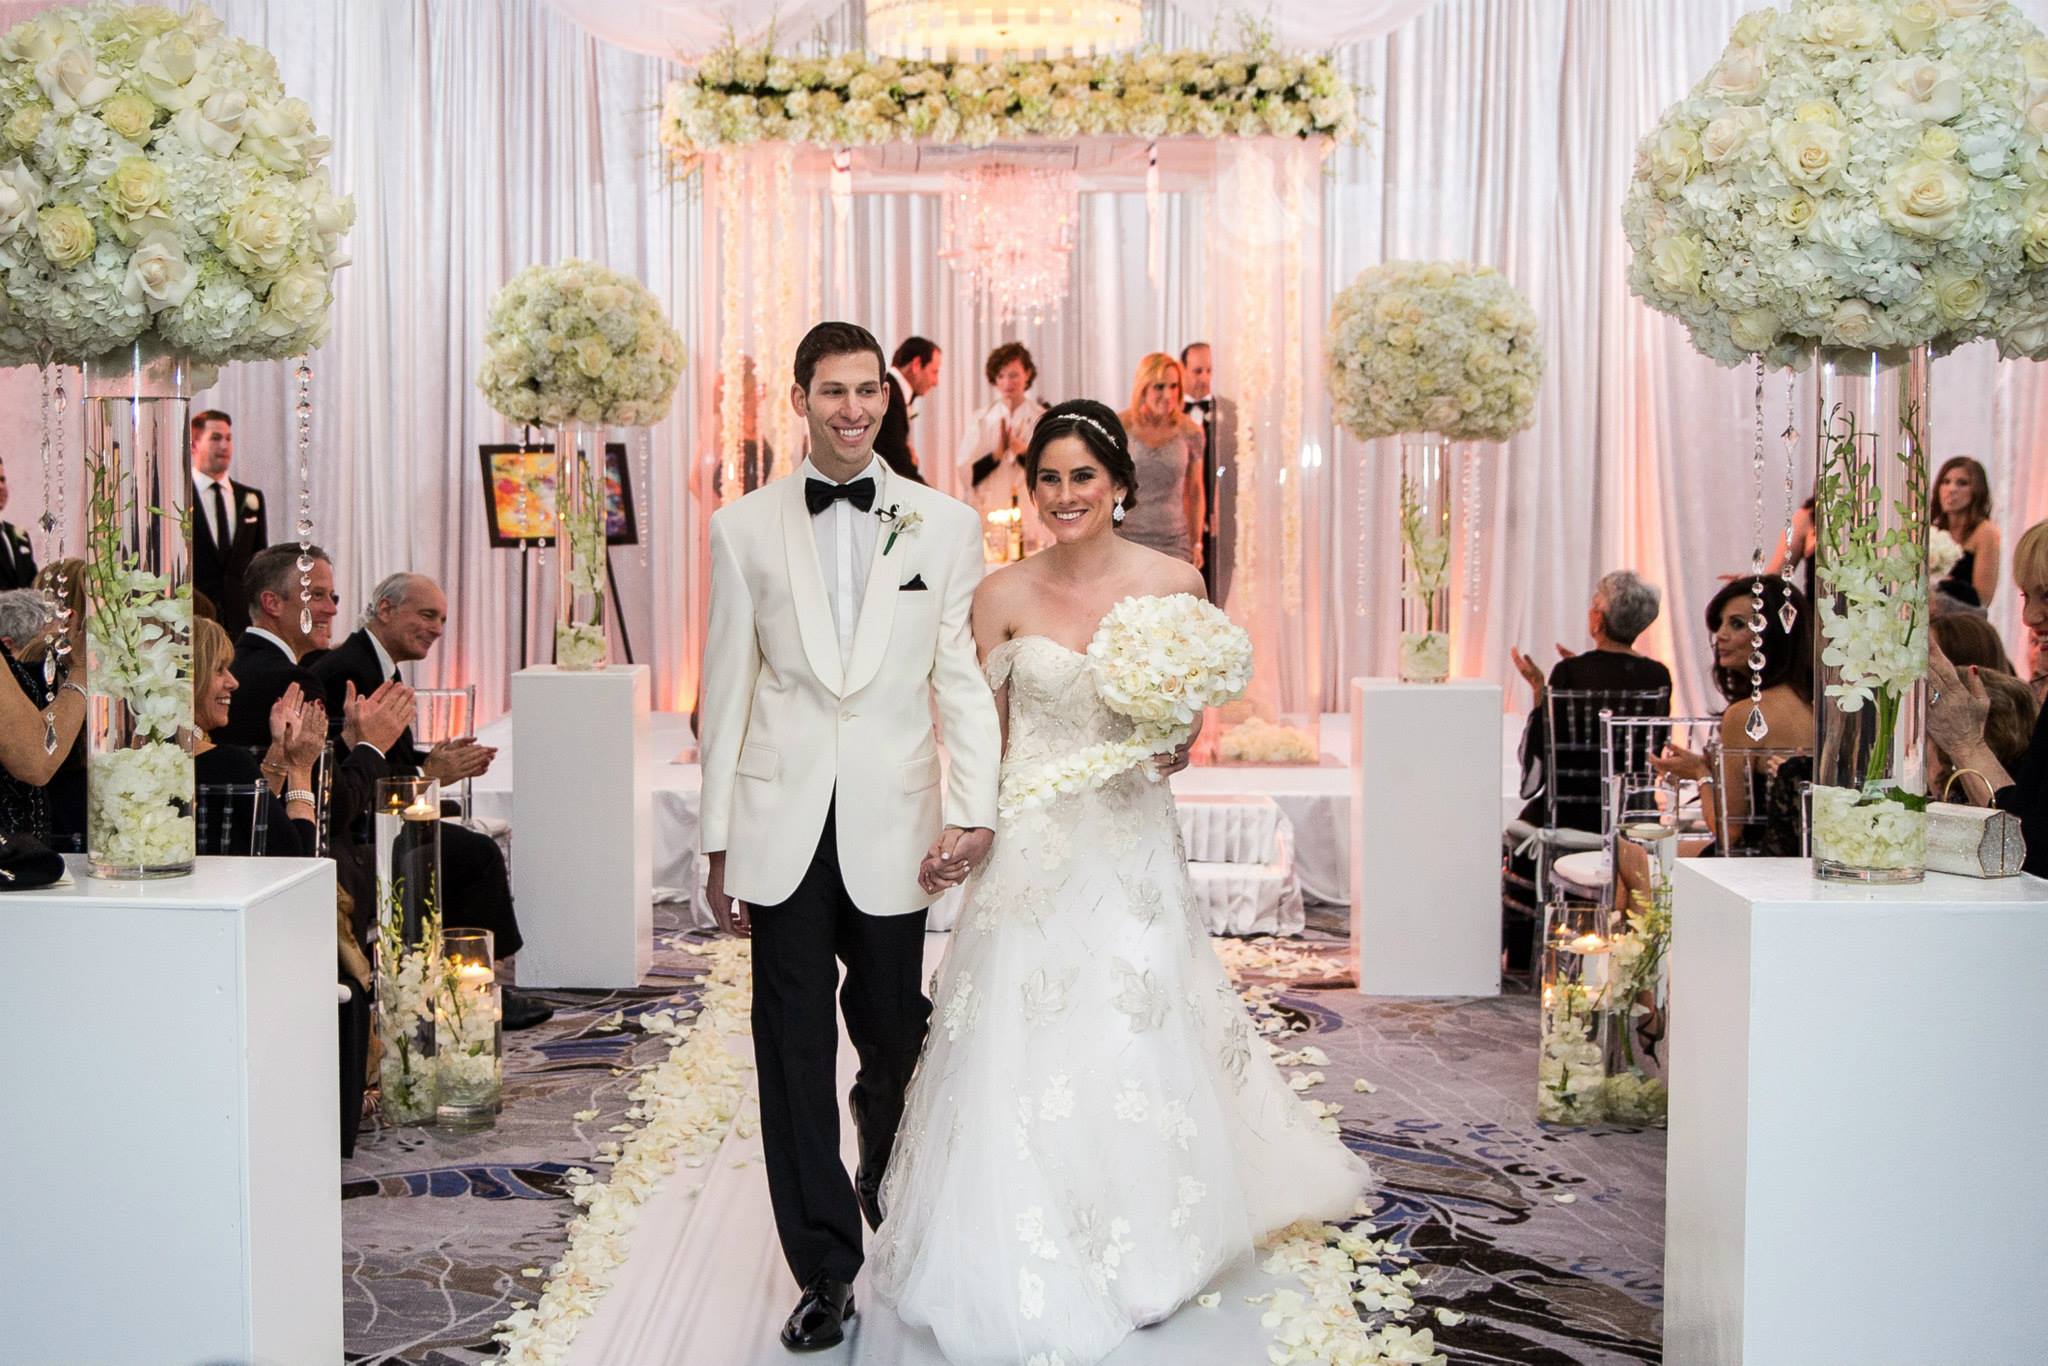 mr-and-mrs-boca-raton-polo-club-luxe-wedding-florals-chuppah-with-chandeliers-and-hanging-flowers-monique-lhuillier-gown-candle-ceremony